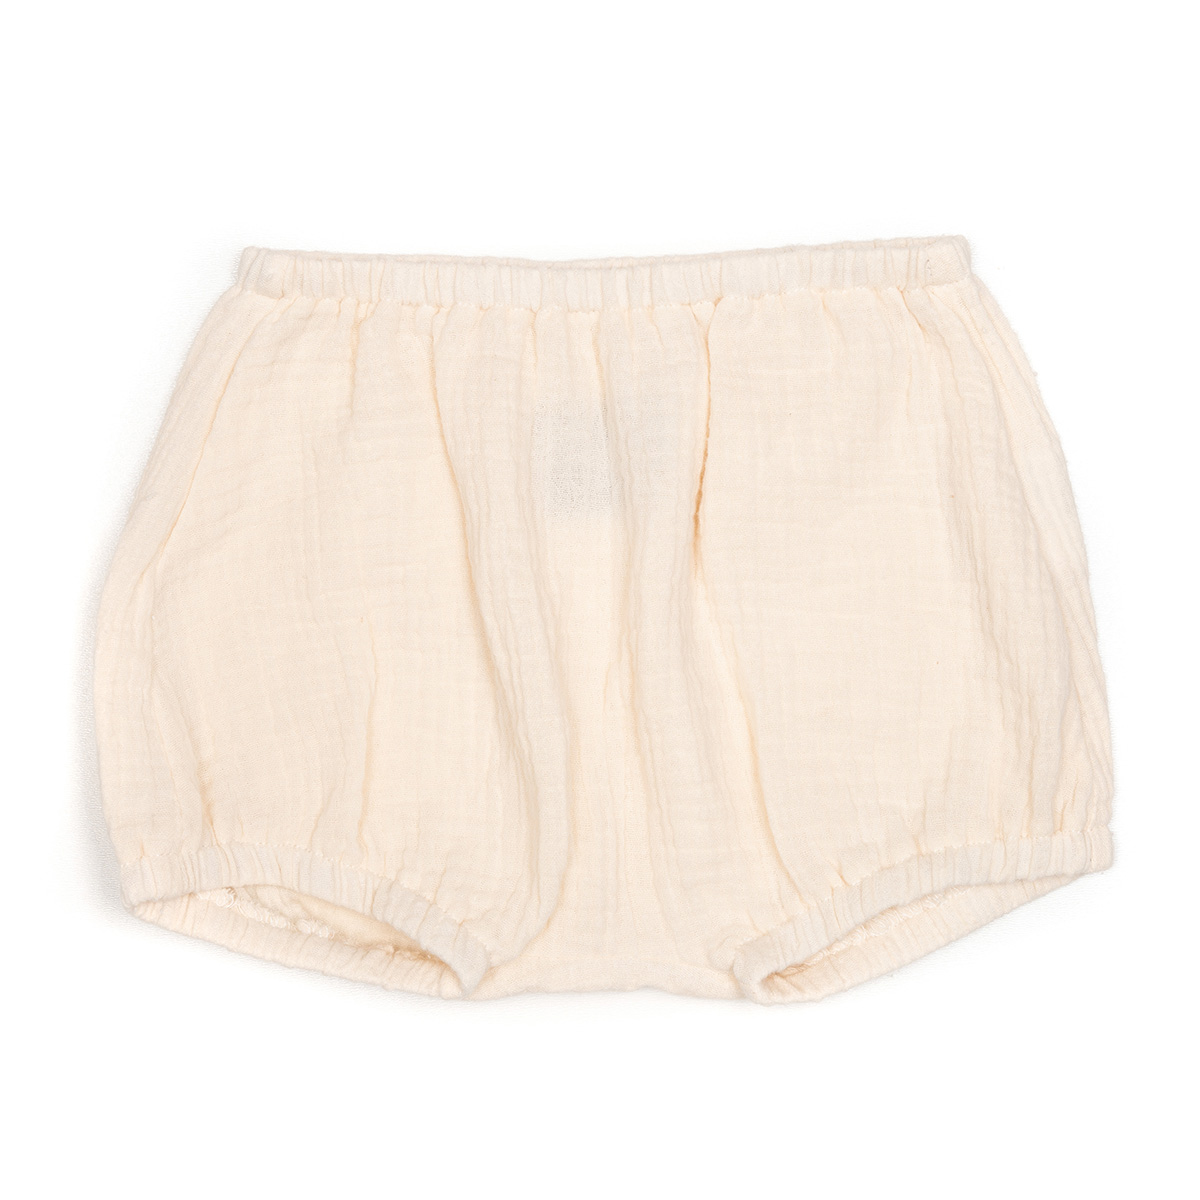 Shorts BAGGY - Huttelihut - Offwhite